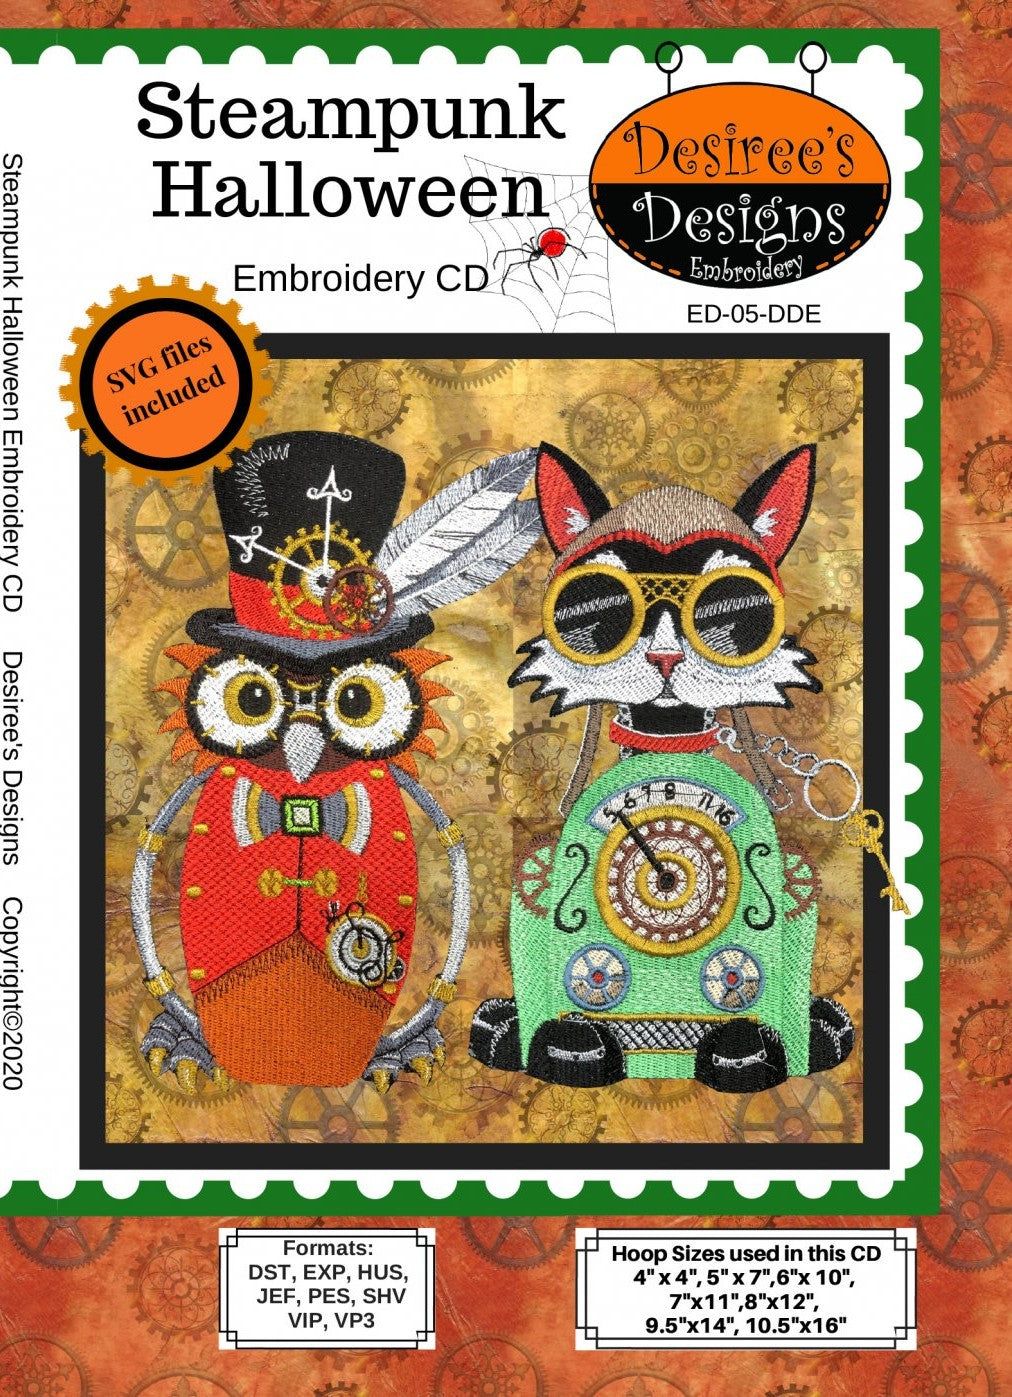 Steampunk Halloween - Embroidery CD